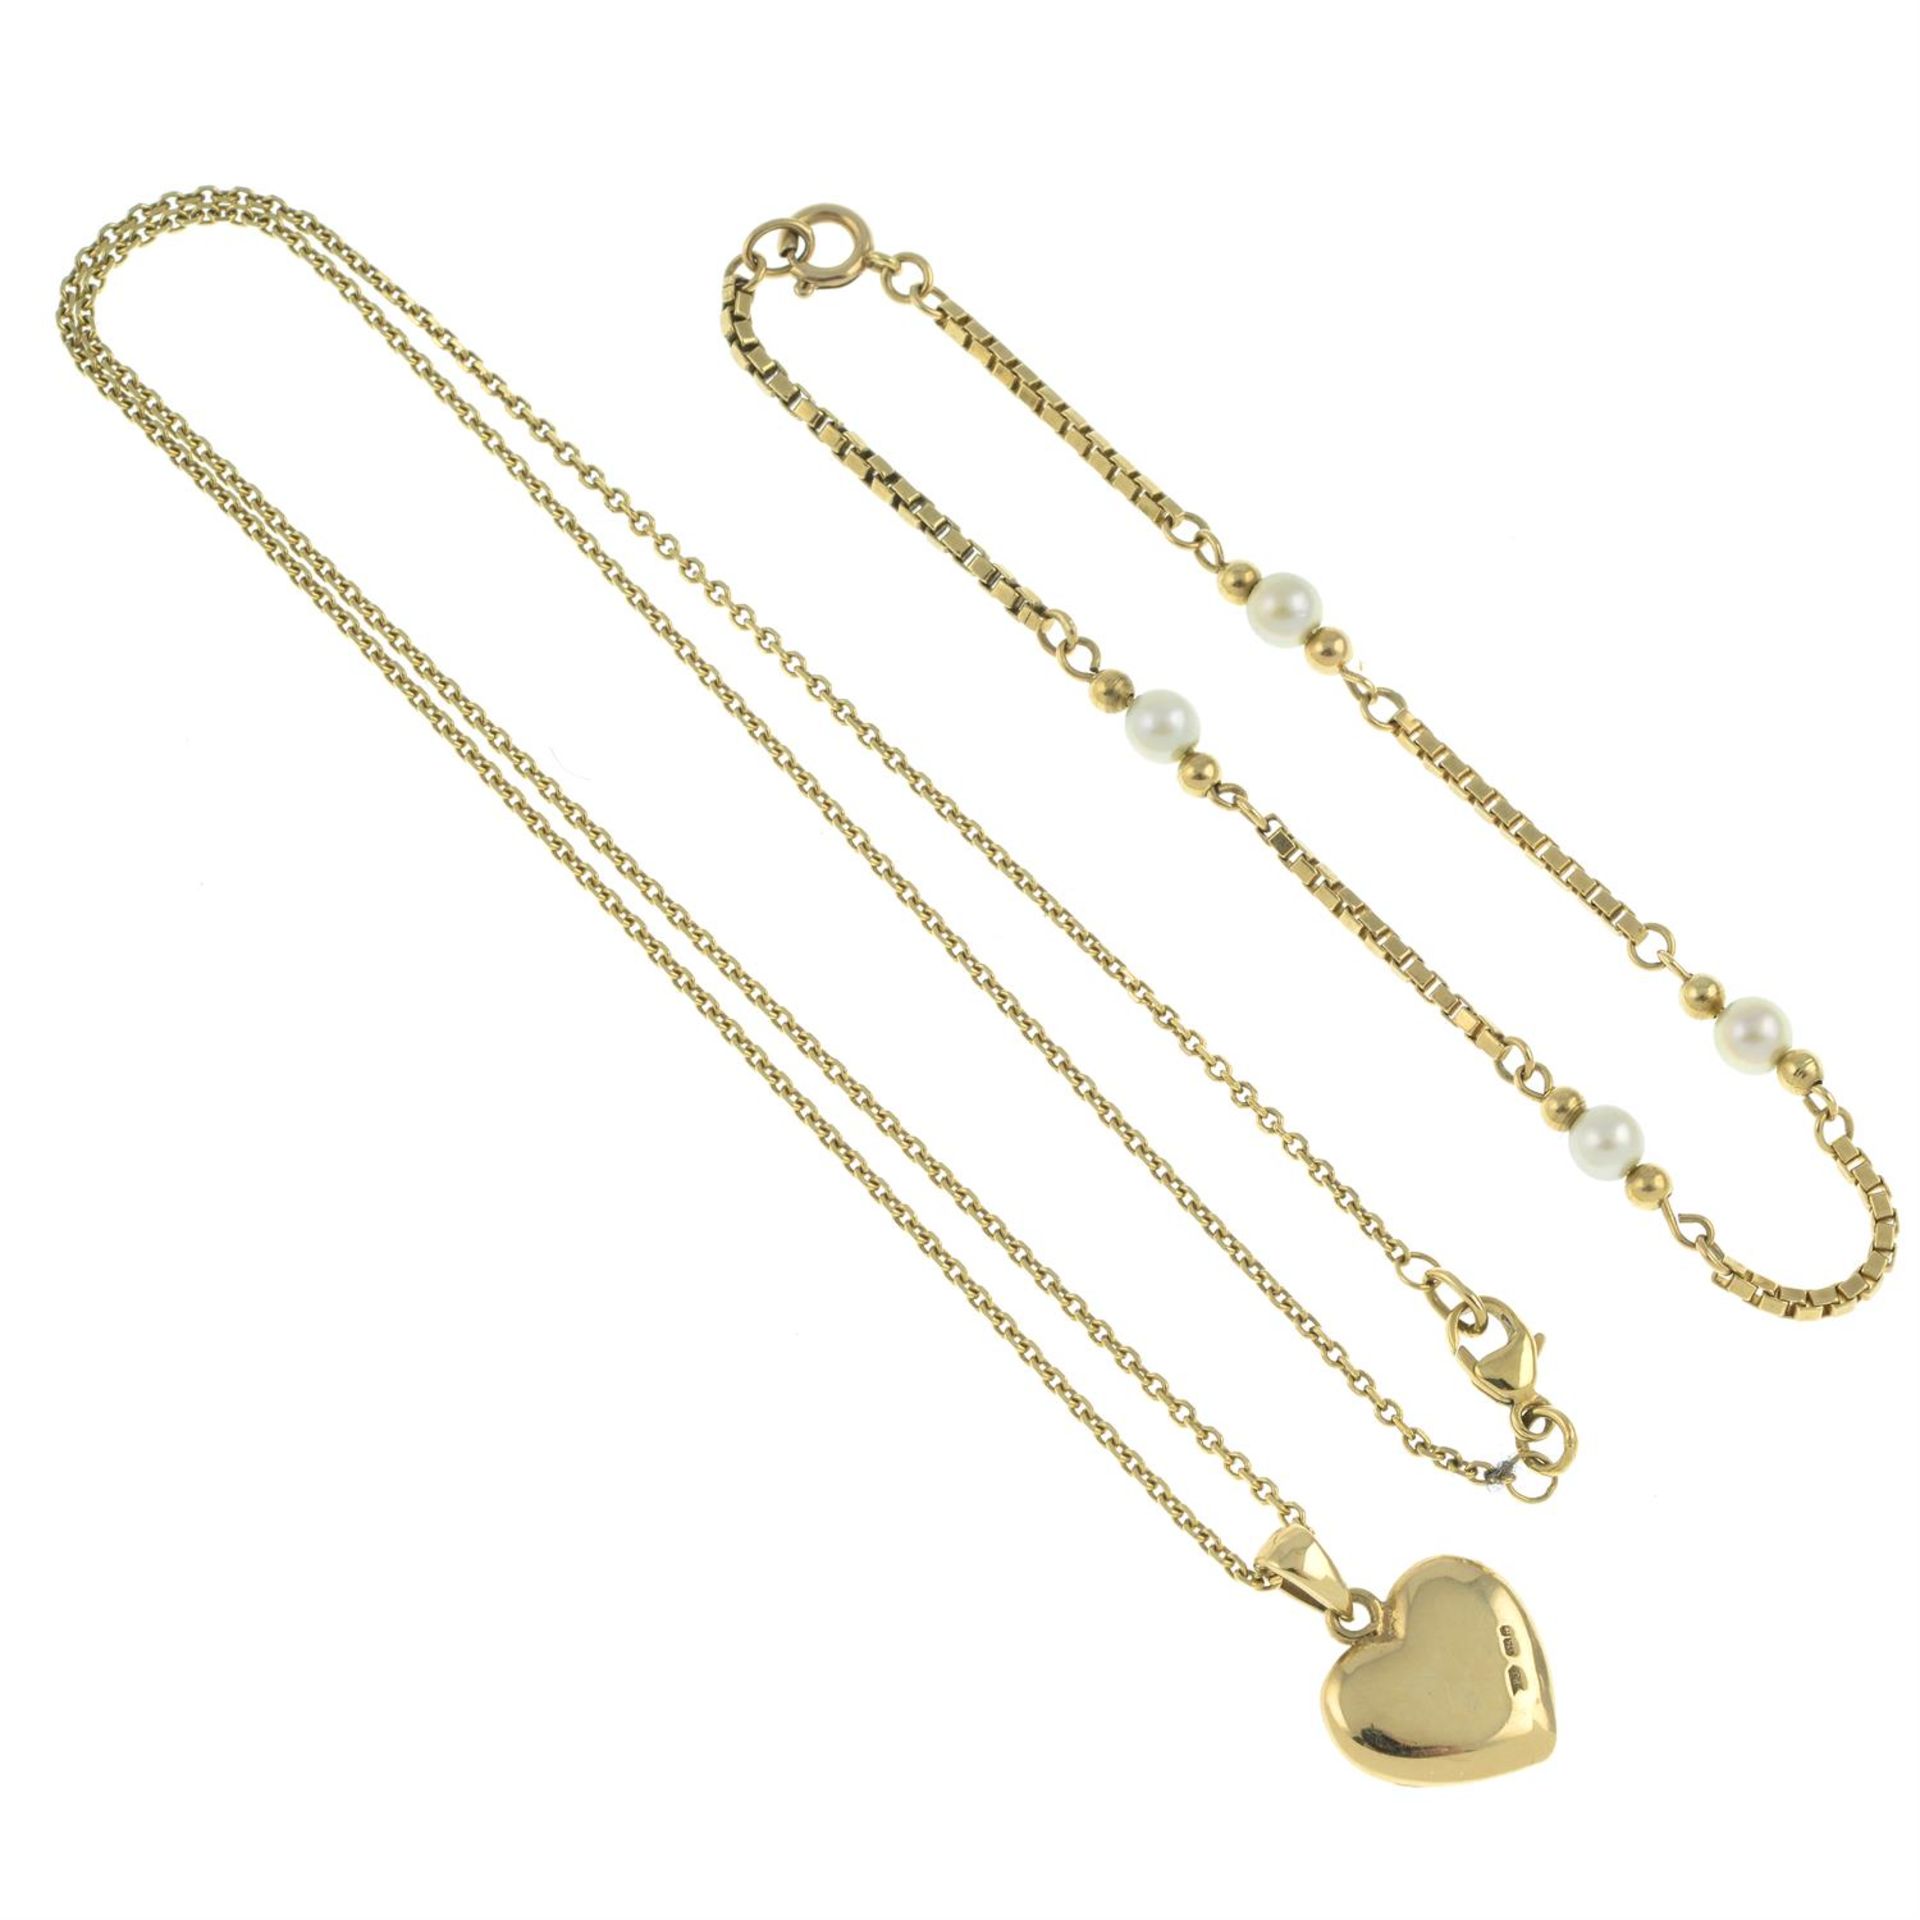 9ct gold diamond heart pendant, with 9ct gold chain & bracelet - Image 2 of 2